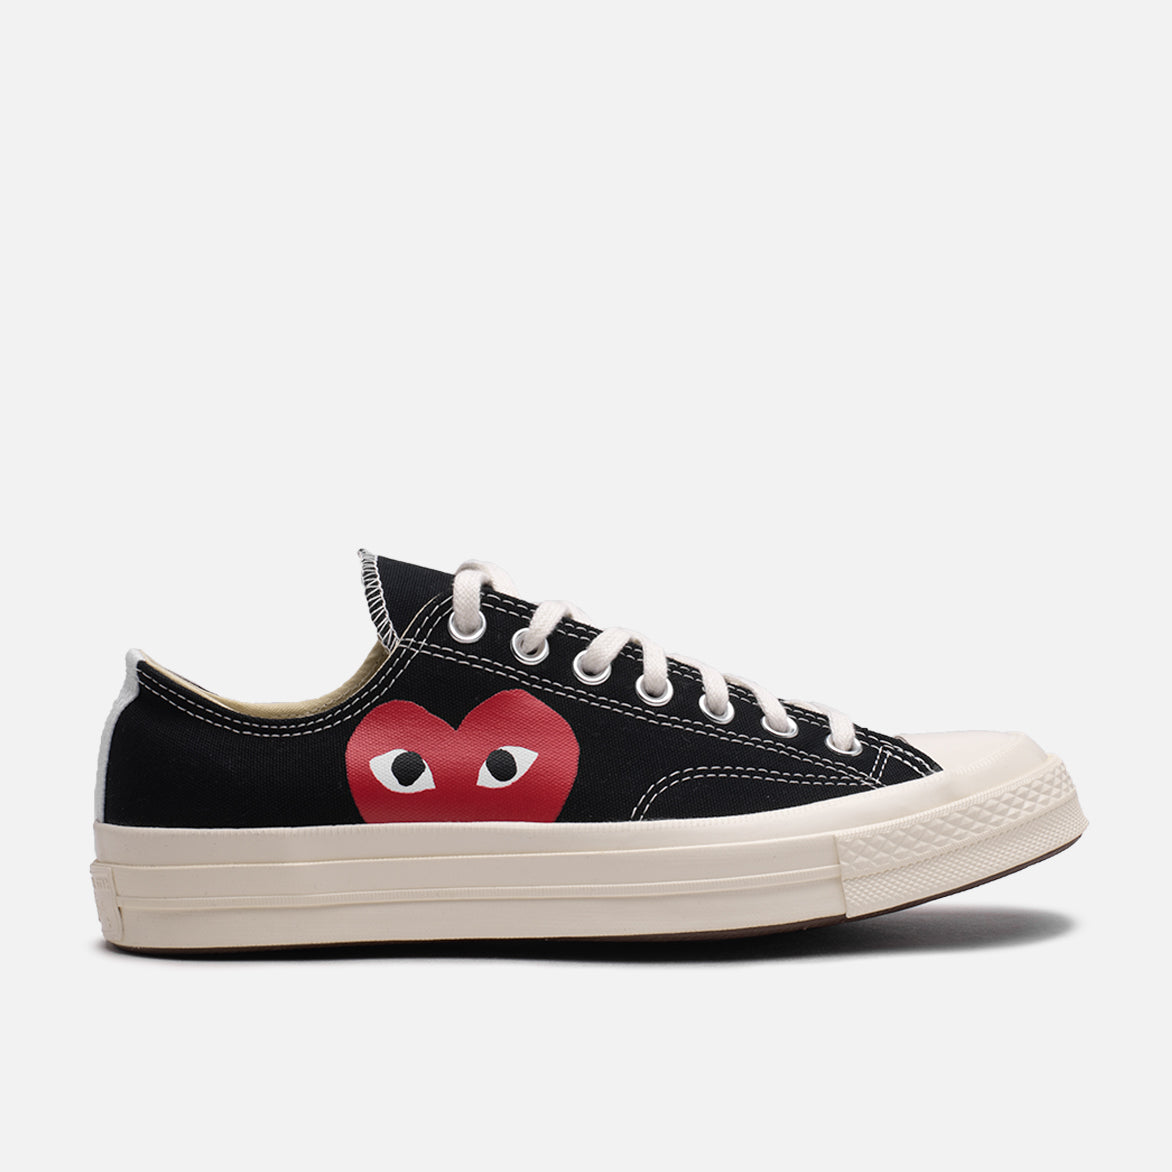 PLAY X CONVERSE TAYLOR ALL STAR '70 OX - BLACK | lapstoneandhammer.com